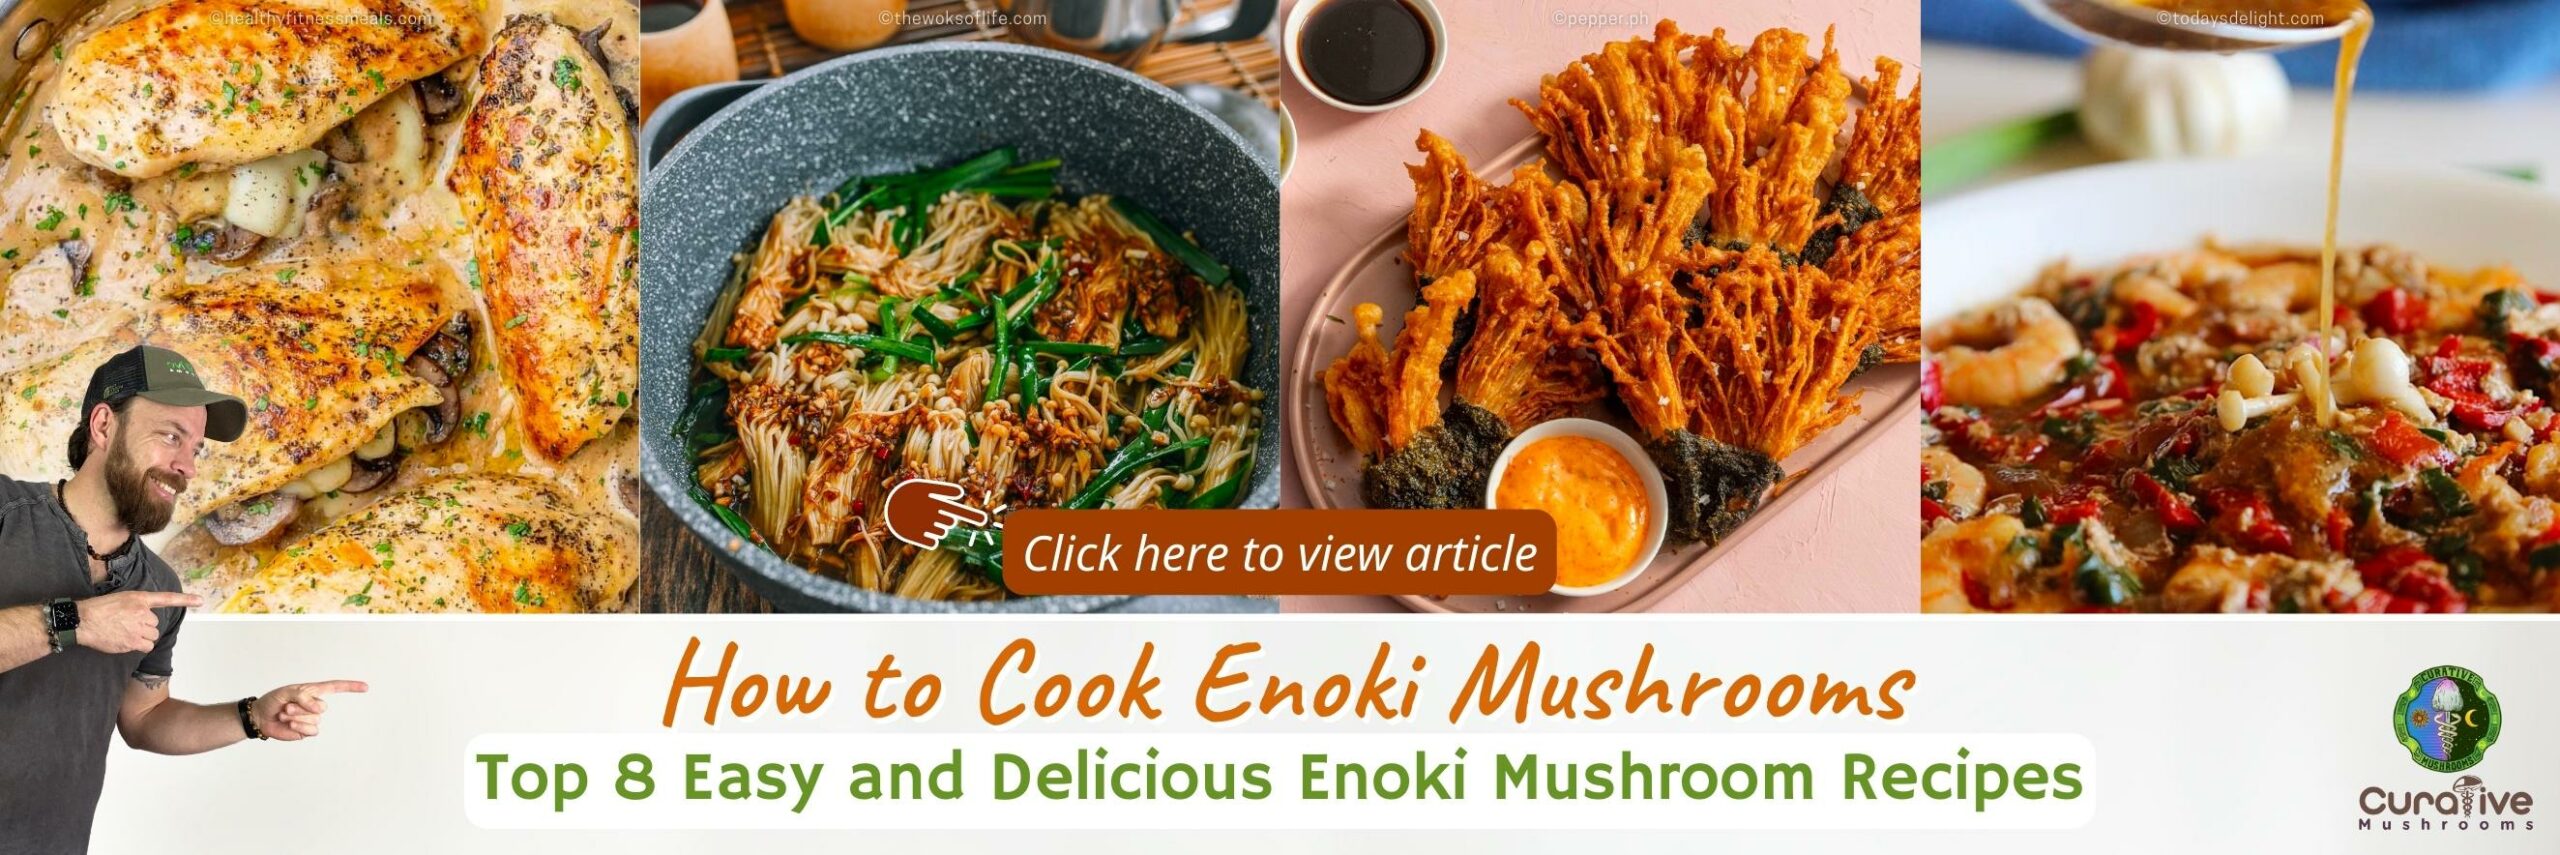 How to Cook Enoki Mushrooms - Top 8 Easy and Delicious Enoki Mushroom Recipes - Click here to view article